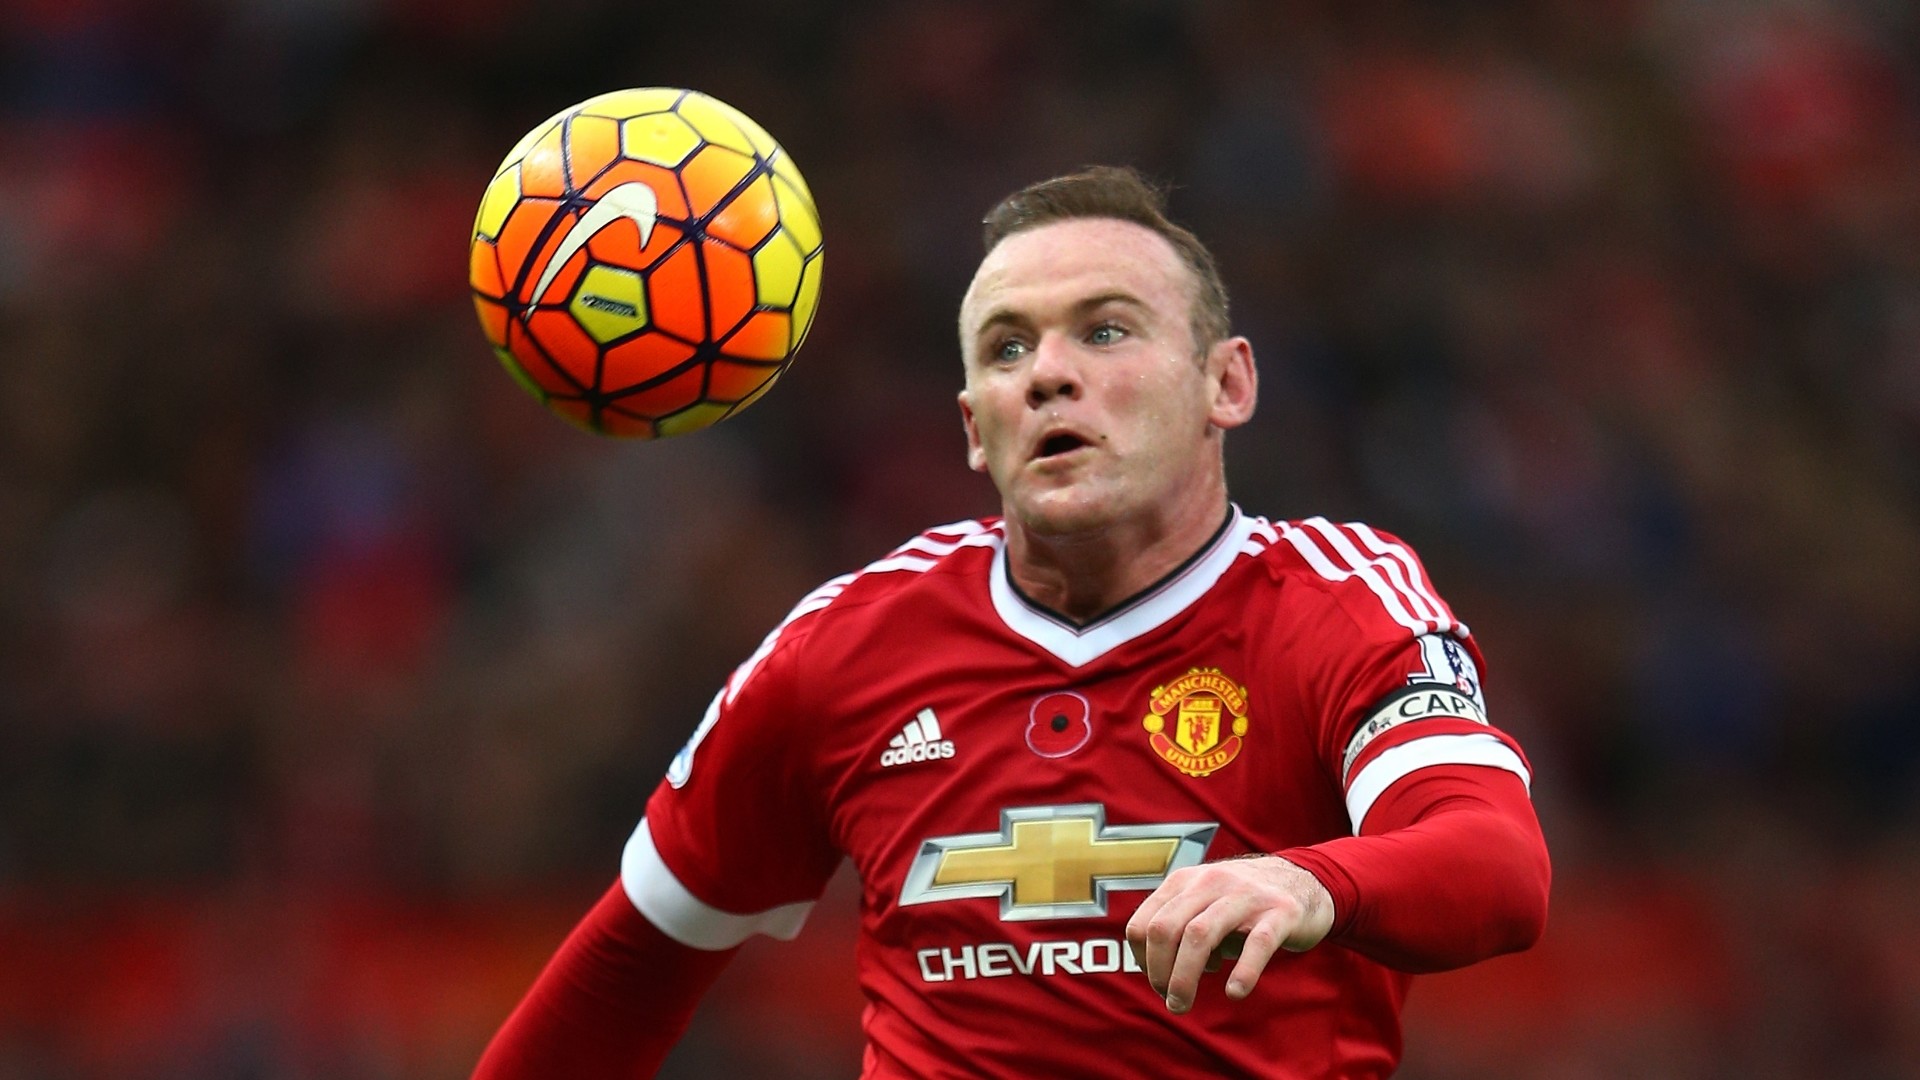 1920x1080 Rooney has reportedly been identified as the superstar China needs to give  their competition a worldwide profile, although The Sun adds that no  agreement is ...